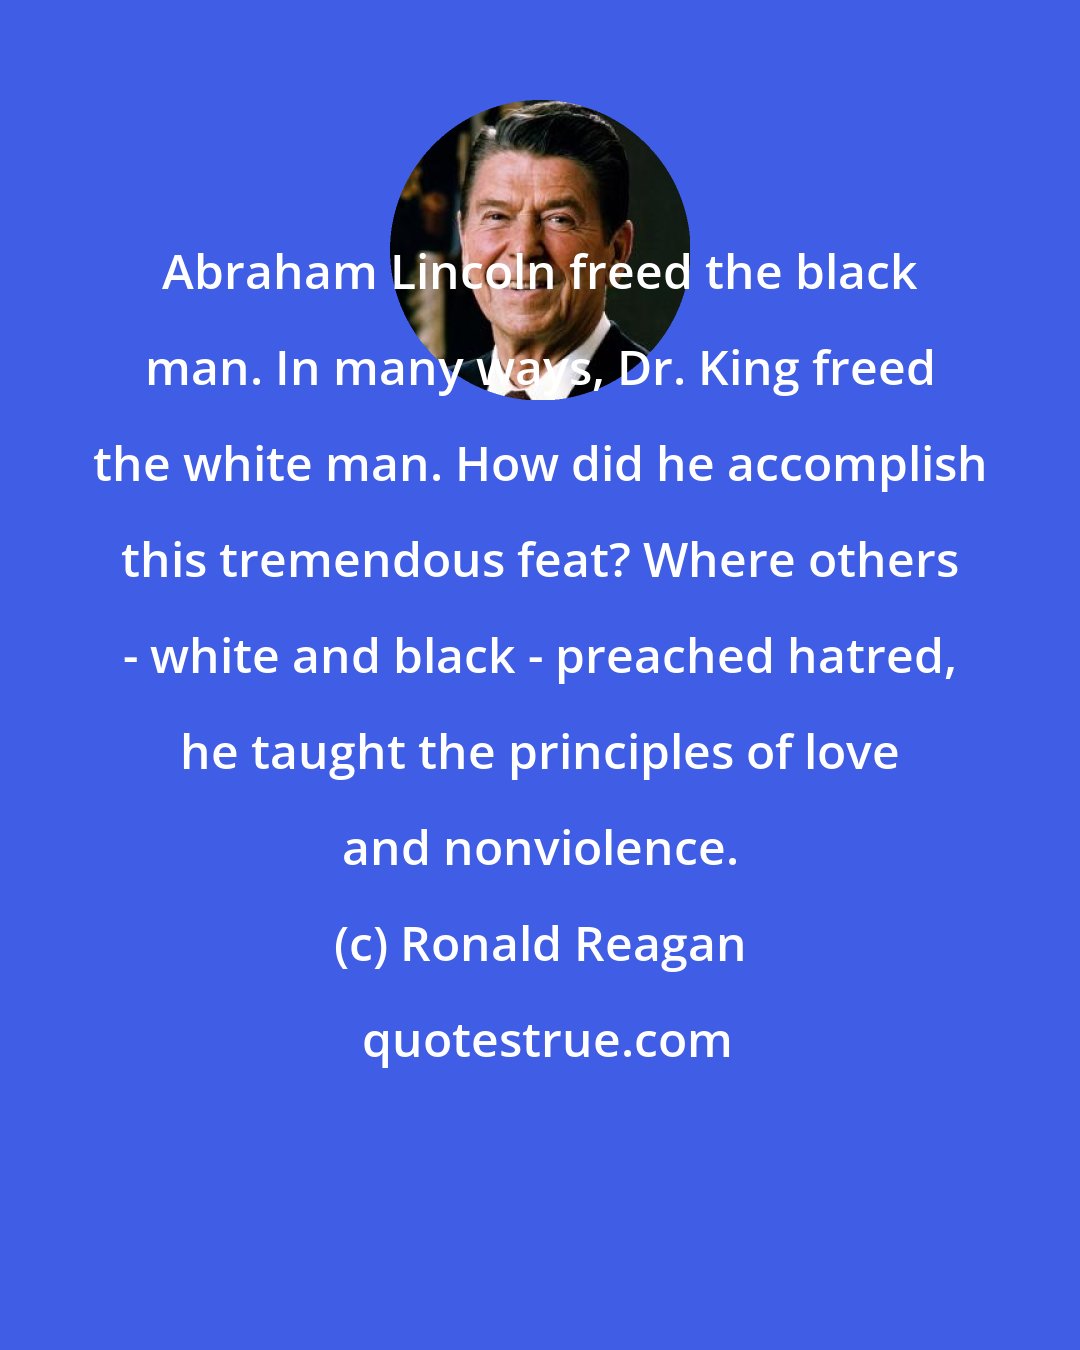 Ronald Reagan: Abraham Lincoln freed the black man. In many ways, Dr. King freed the white man. How did he accomplish this tremendous feat? Where others - white and black - preached hatred, he taught the principles of love and nonviolence.